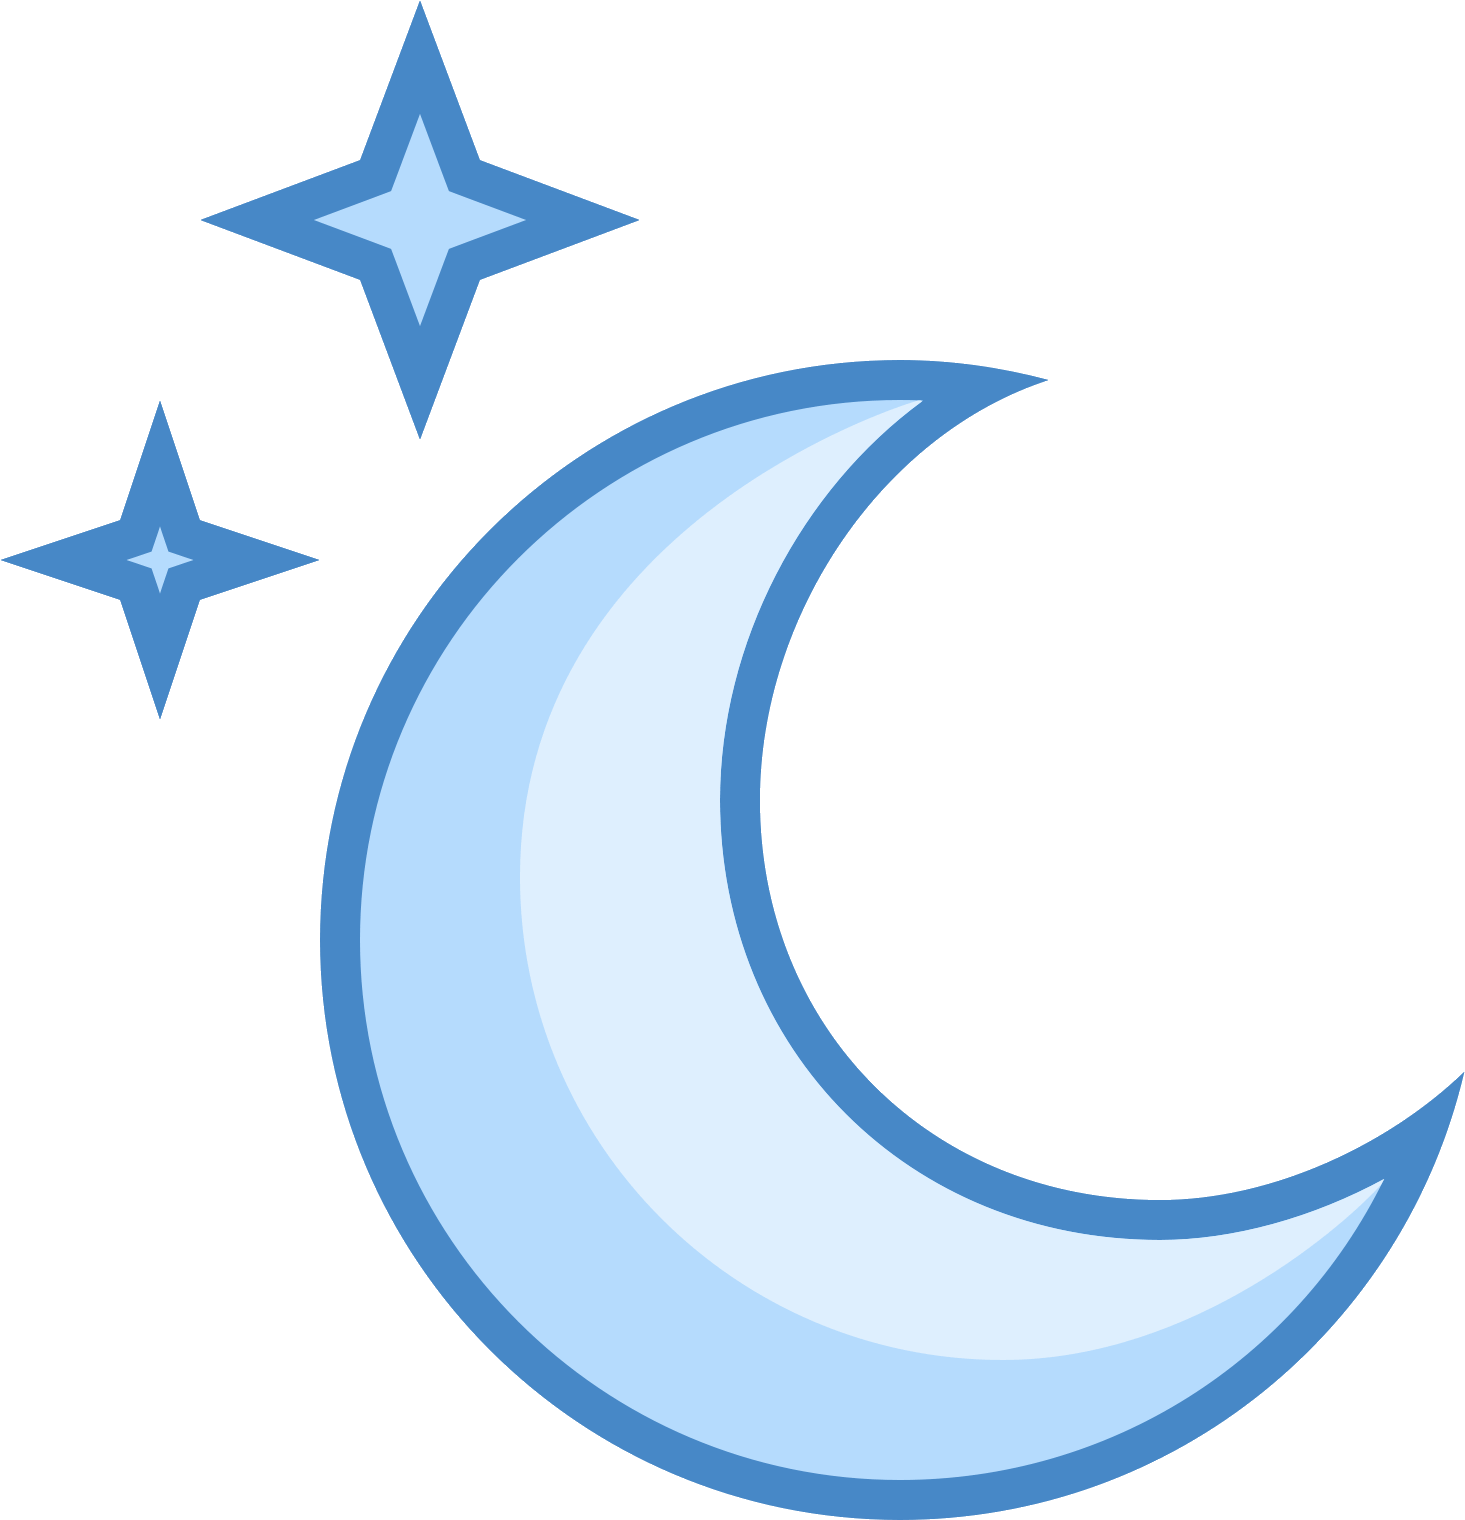 Moon And Stars Icon - Moon Flat Icon Png (1600x1600)